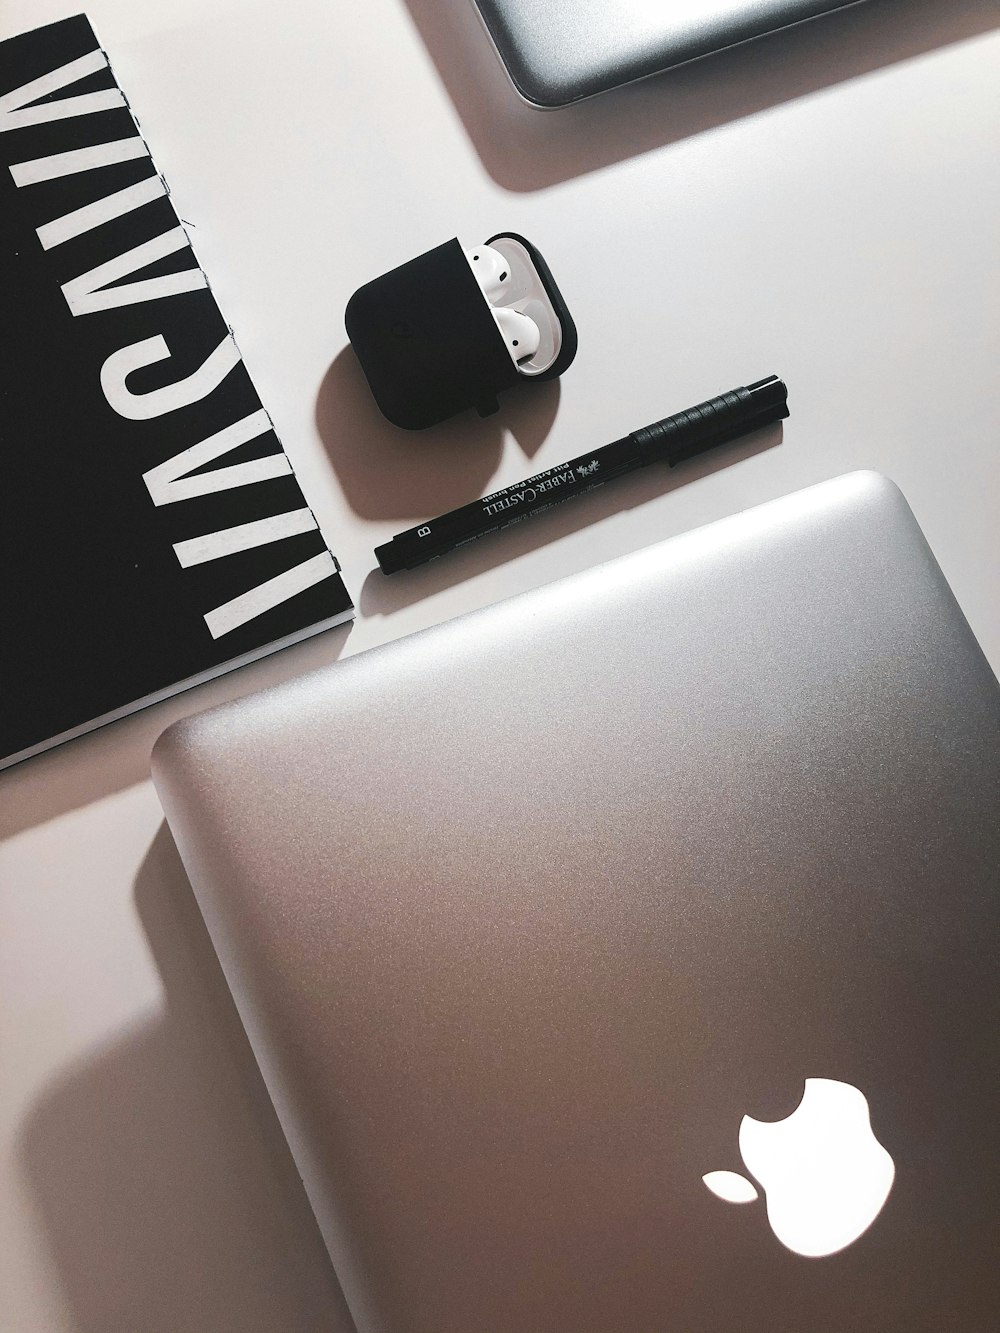 black and silver click pen beside silver macbook